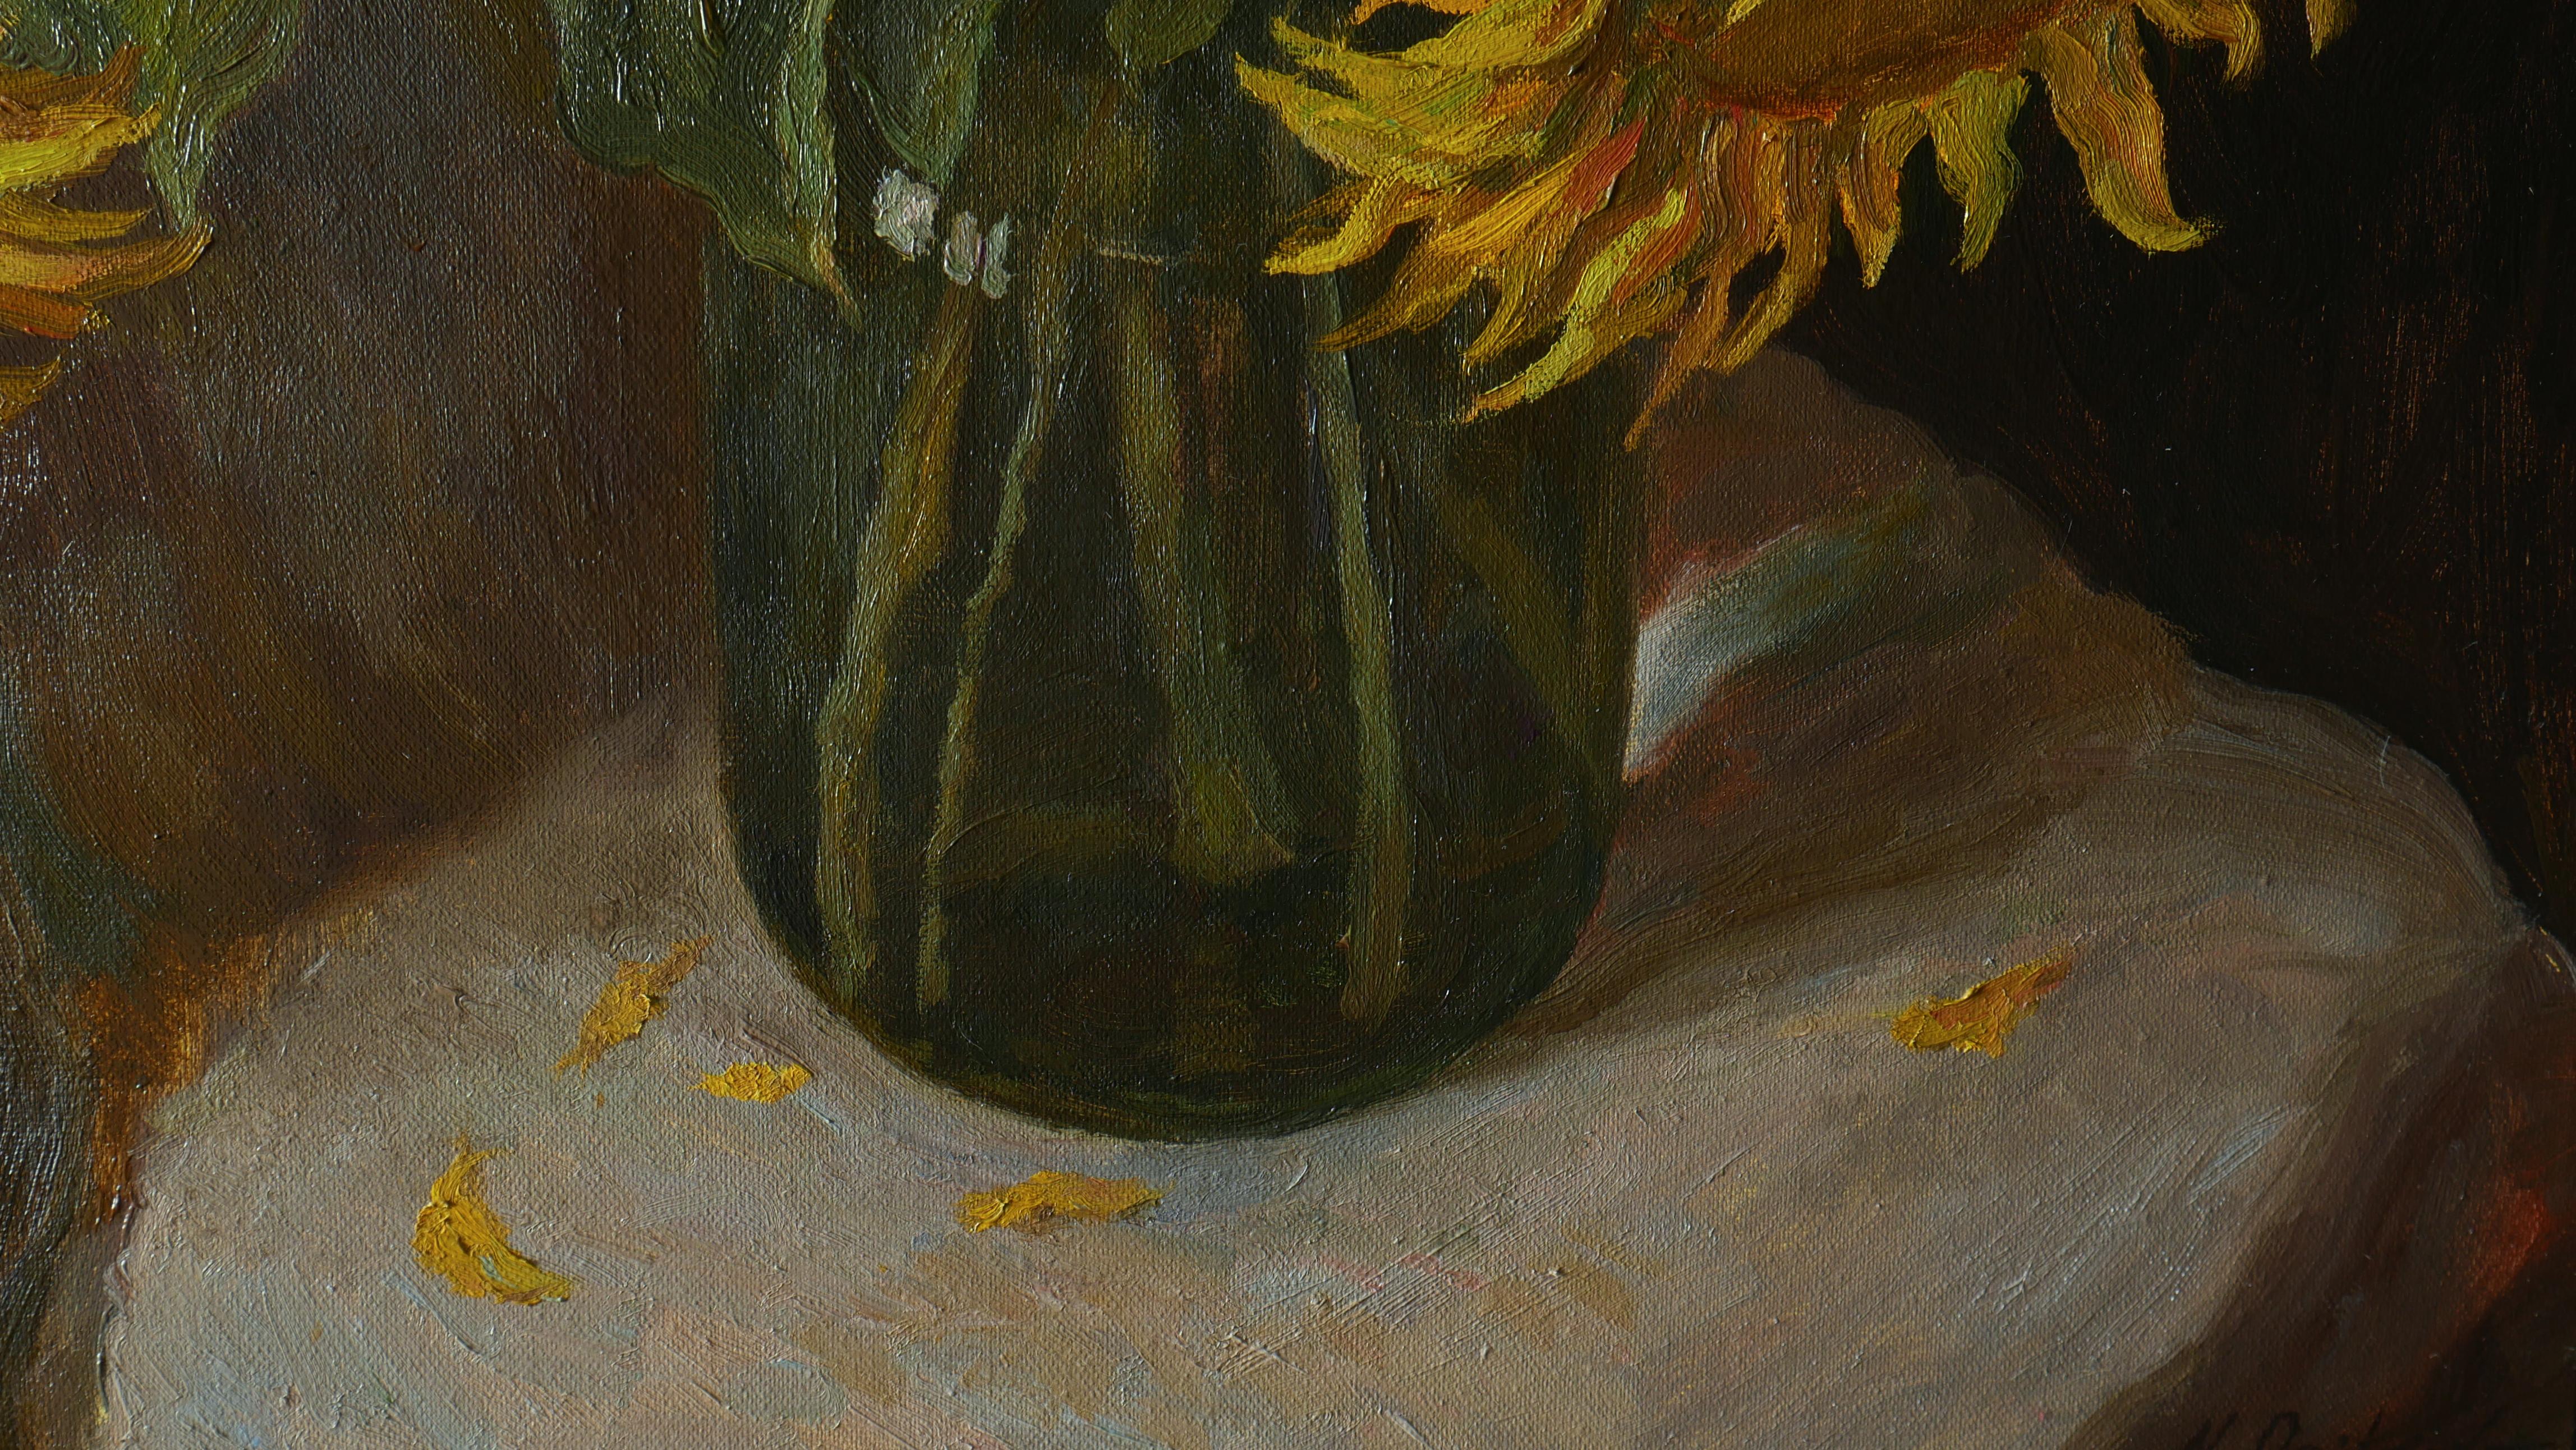 The Bouquet Of Sunflowers - sunflower still life painting For Sale 3